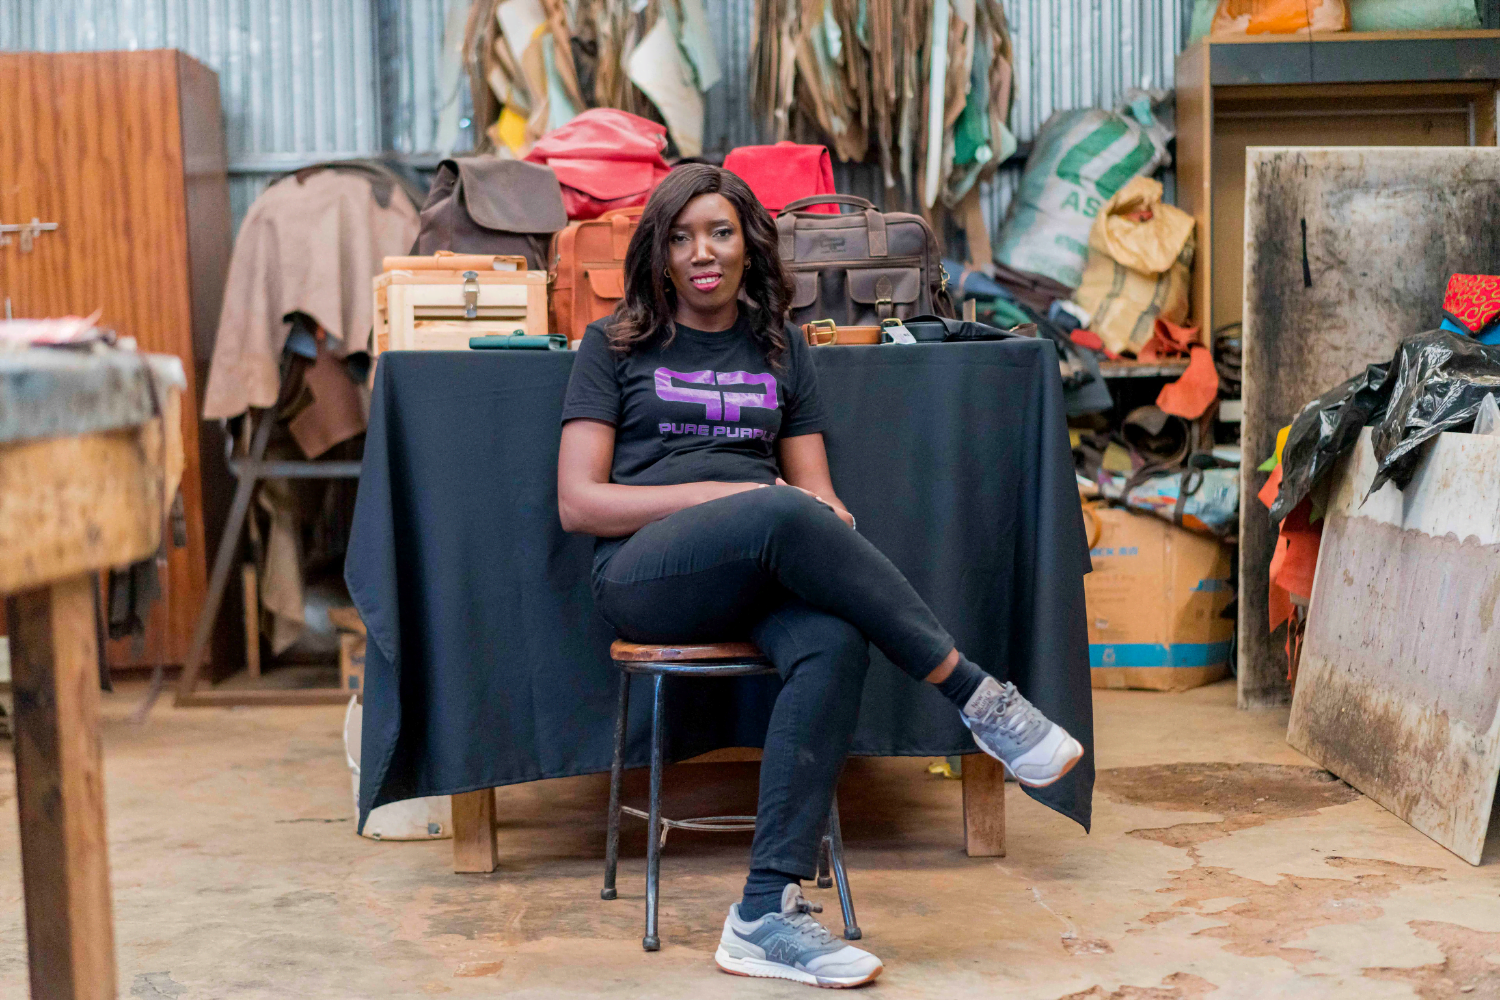 A Kenyan woman entrepreneur, Yolanda Odida, sits in front of a black table with several leather bags, produced by her company Pure Purple.